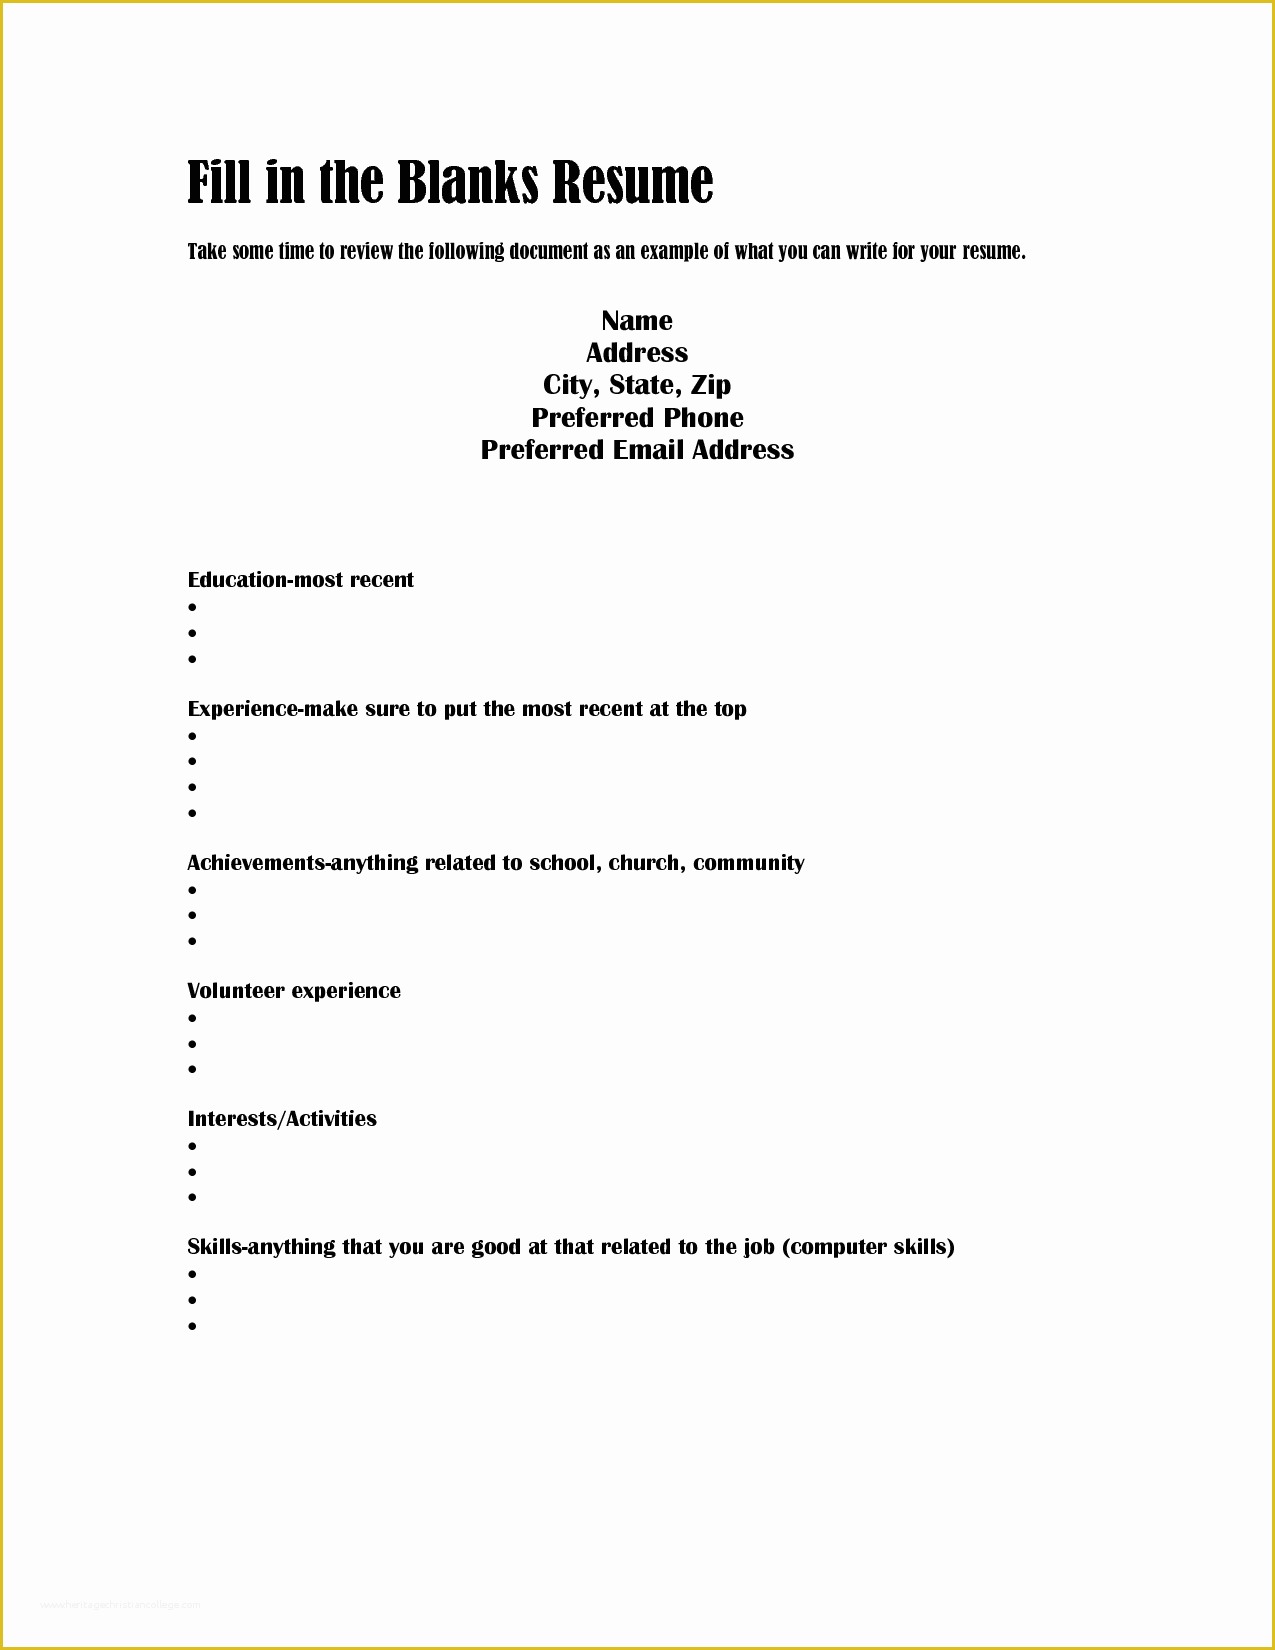 Free Printable Fill In the Blank Resume Templates Of Blank Resume Templates Mughals